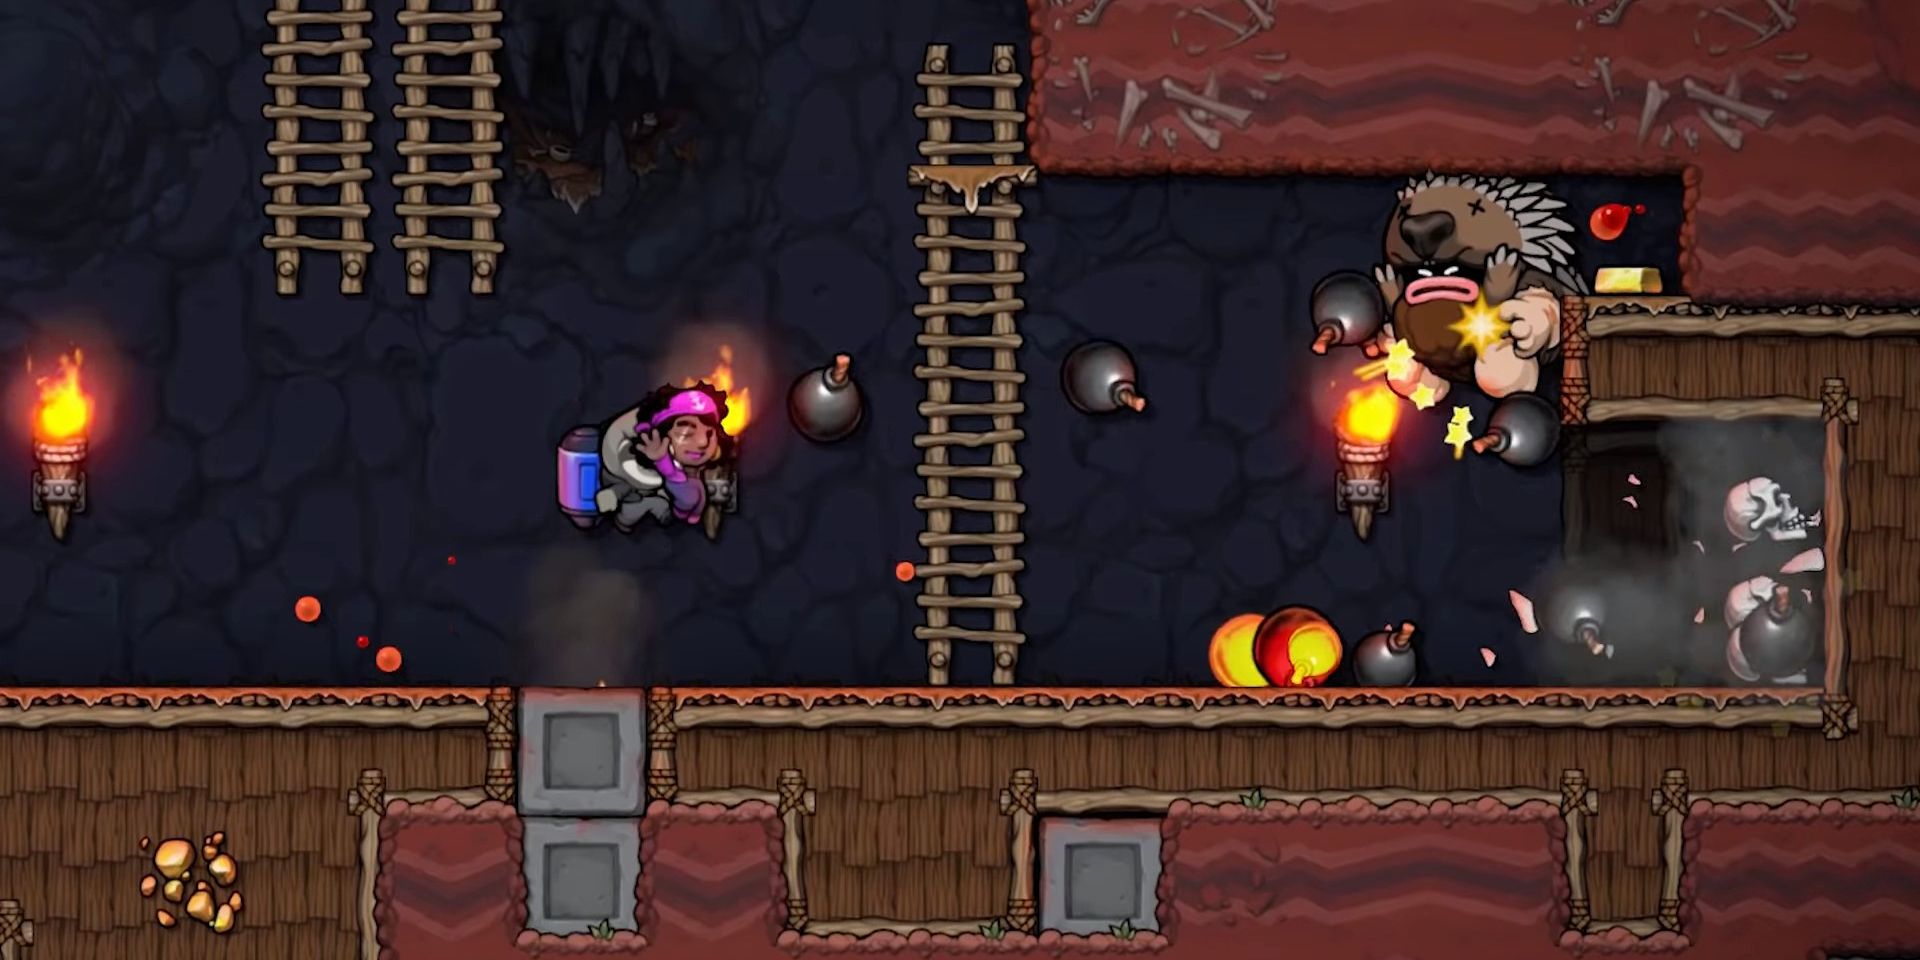 Gameplay for Spelunky with the bombs